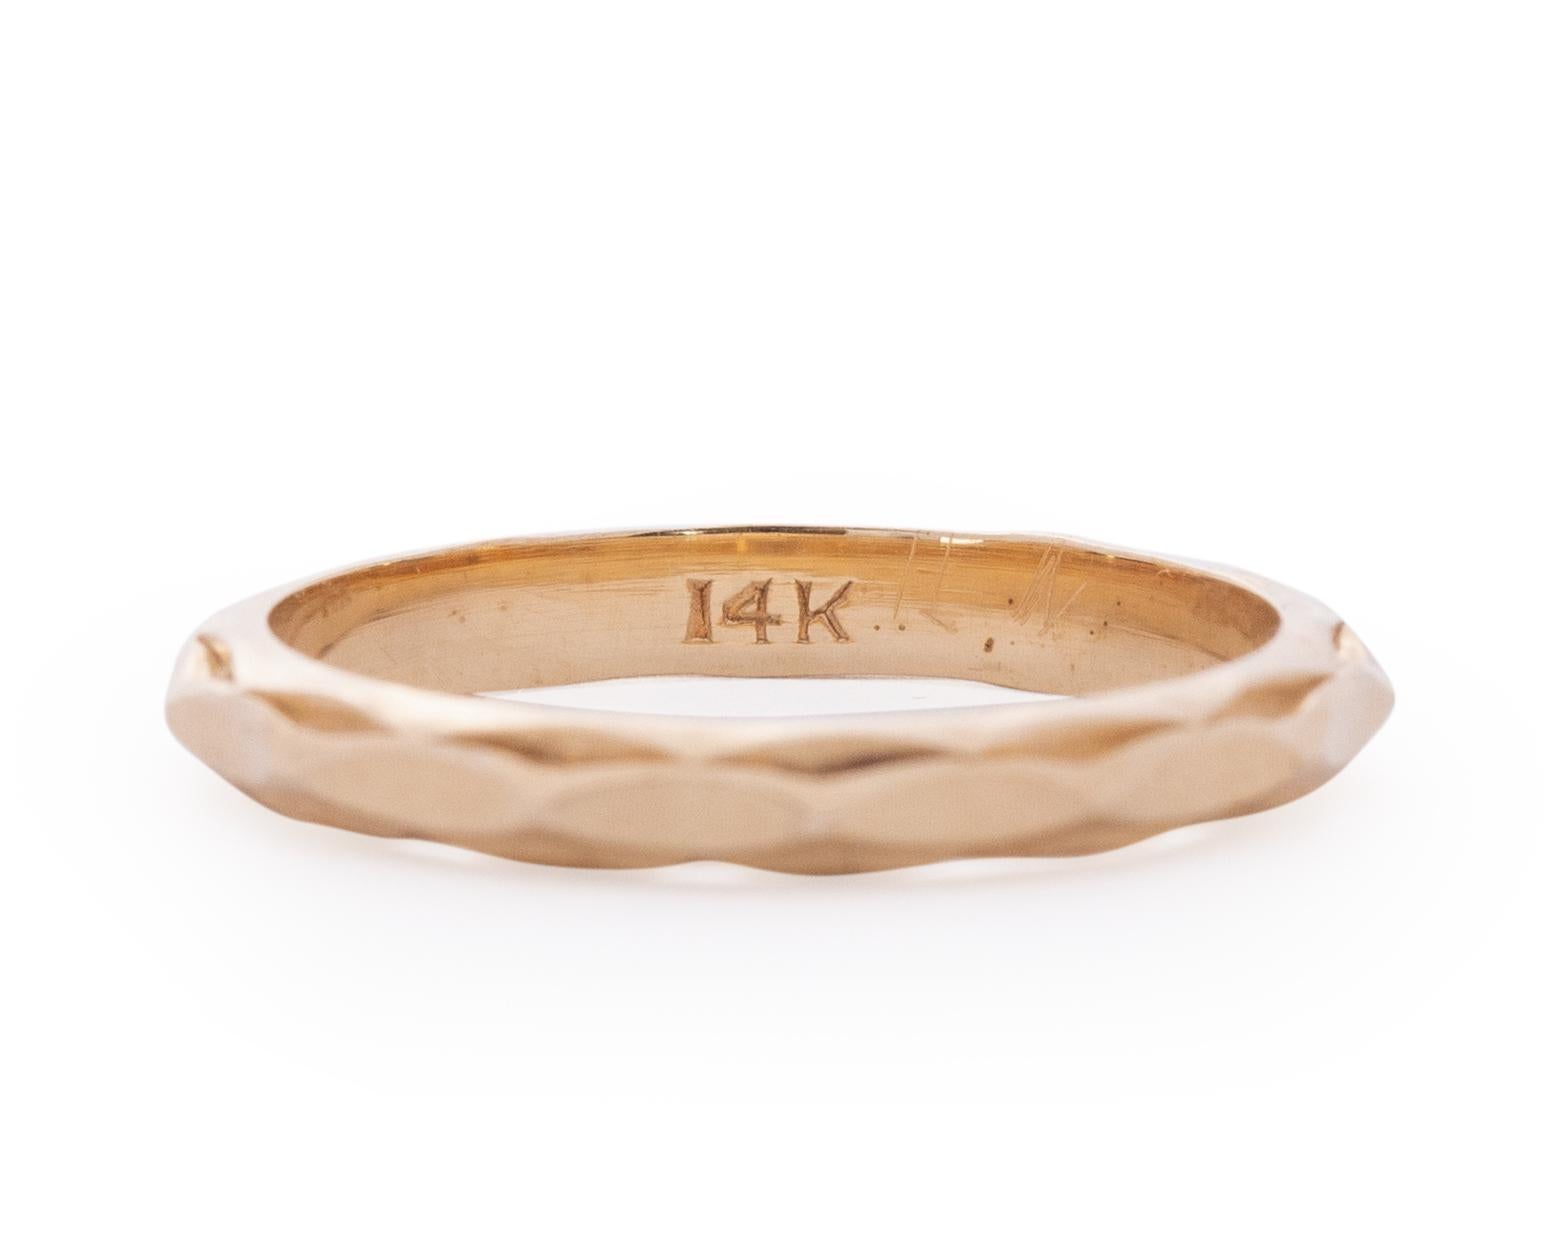 Item Details: 
Ring Size: 6.75
Metal Type: 14 Karat Yellow gold [Hallmarked, and Tested]
Weight: 2.0 grams

Finger to Top of Stone Measurement: 1.5 mm
Condition: Excellent